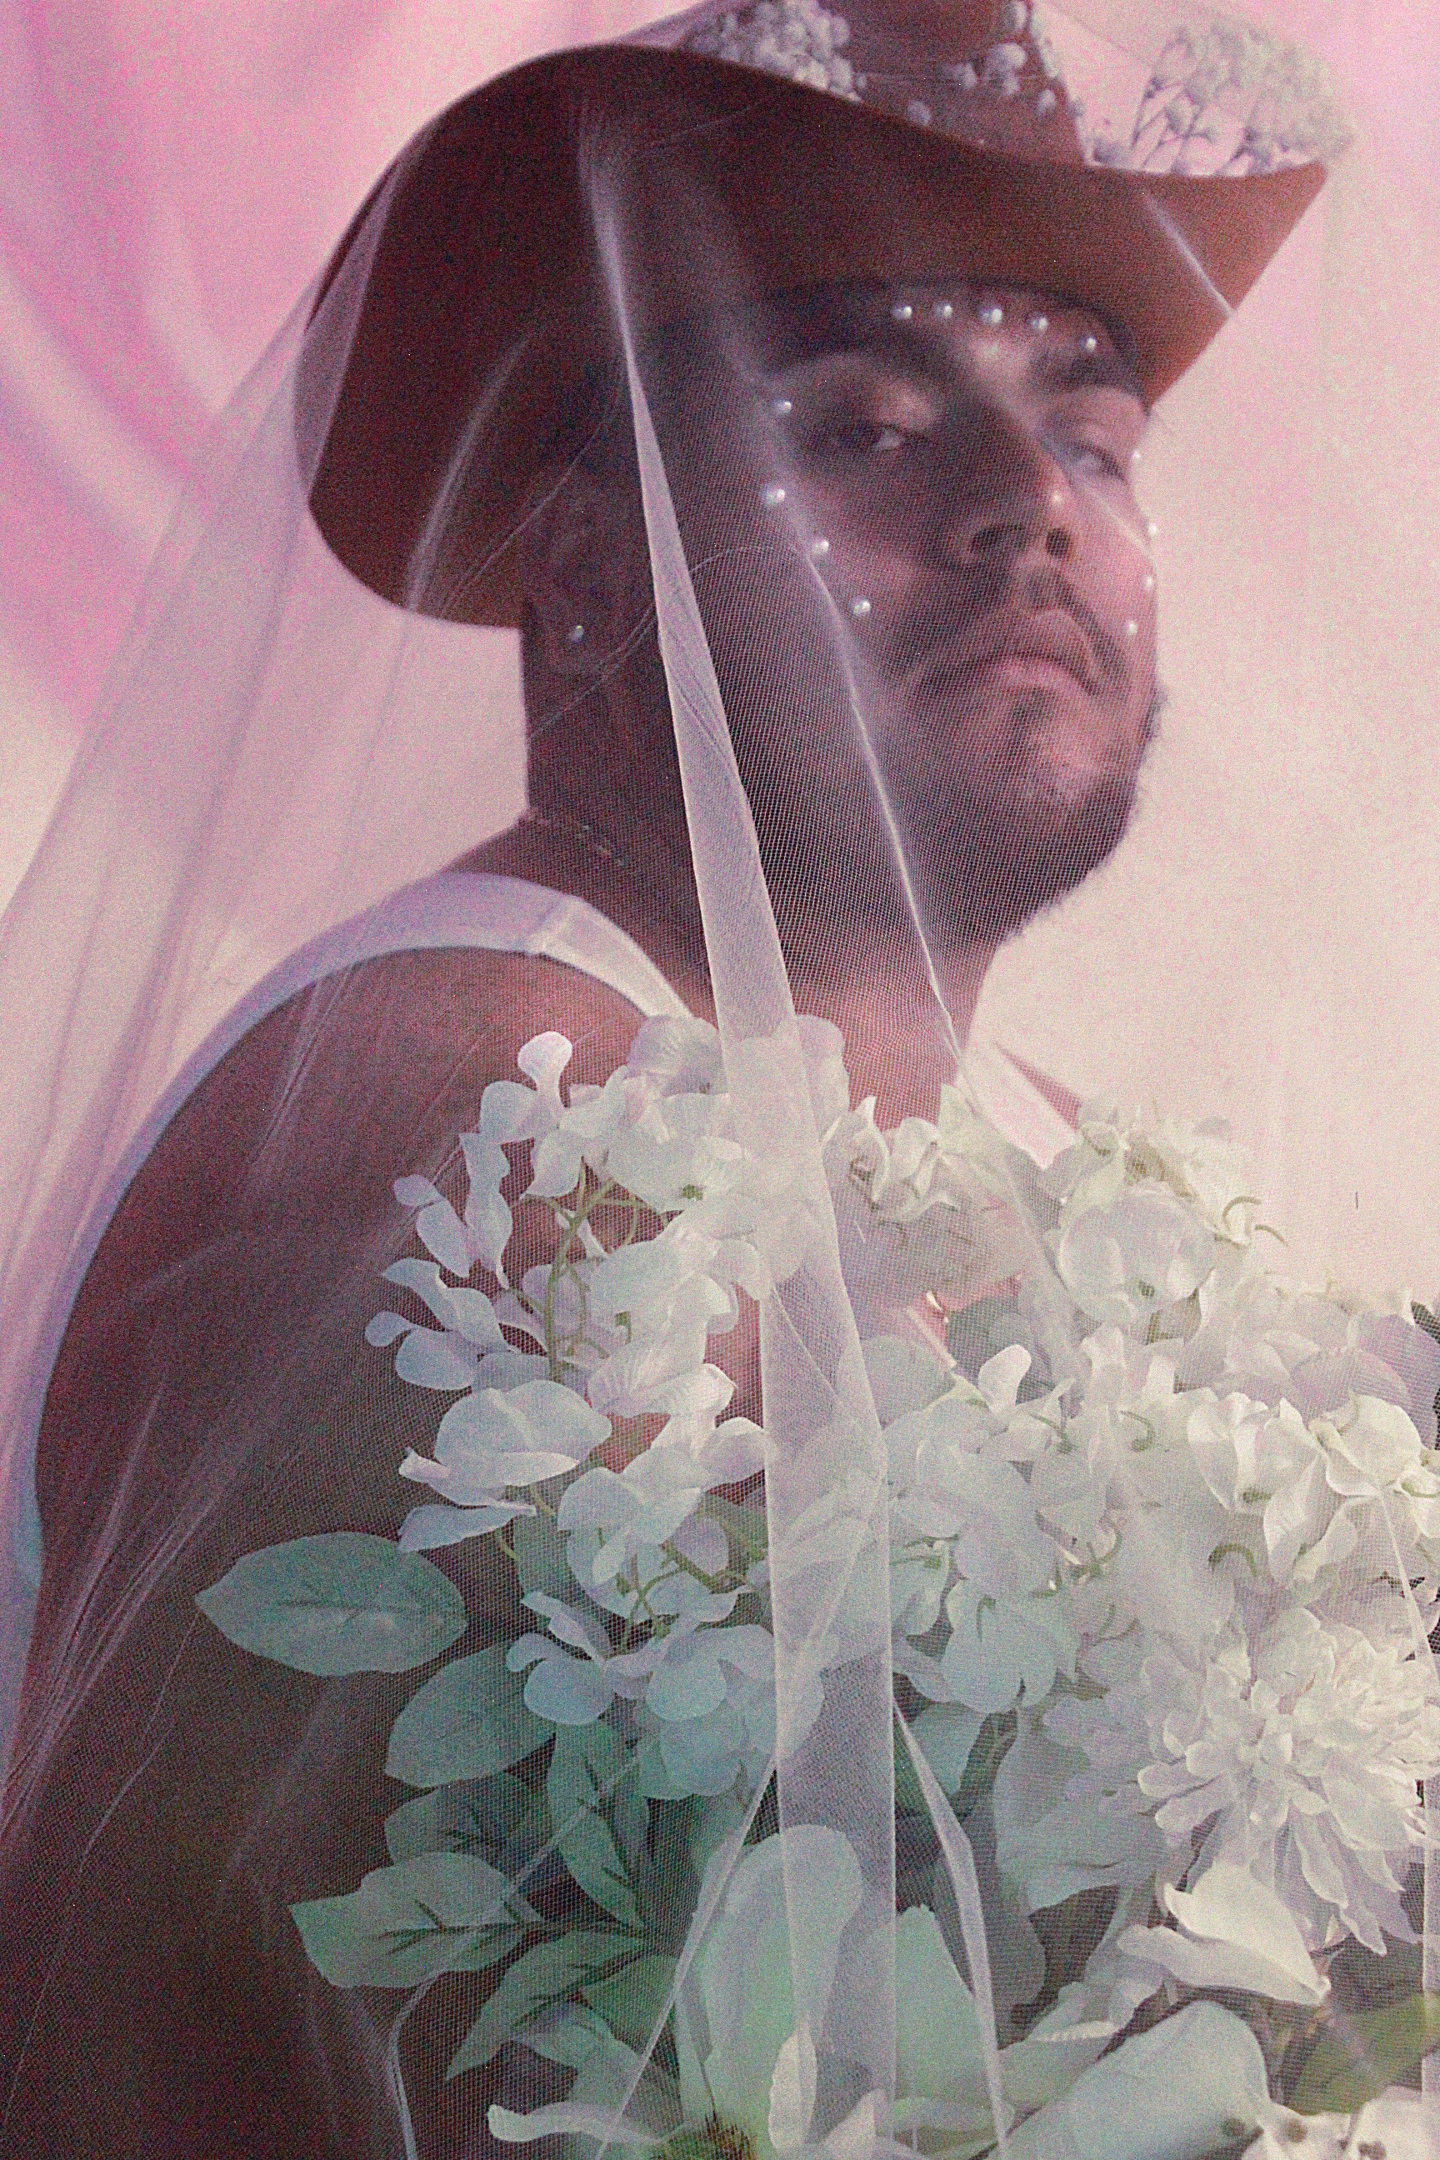 A portrait of Ulises, wearing a white tank top and a red cowboy hat, surrounded by white flowers and covered by a soft pink veil. The look on Ulises face is soft yet strong